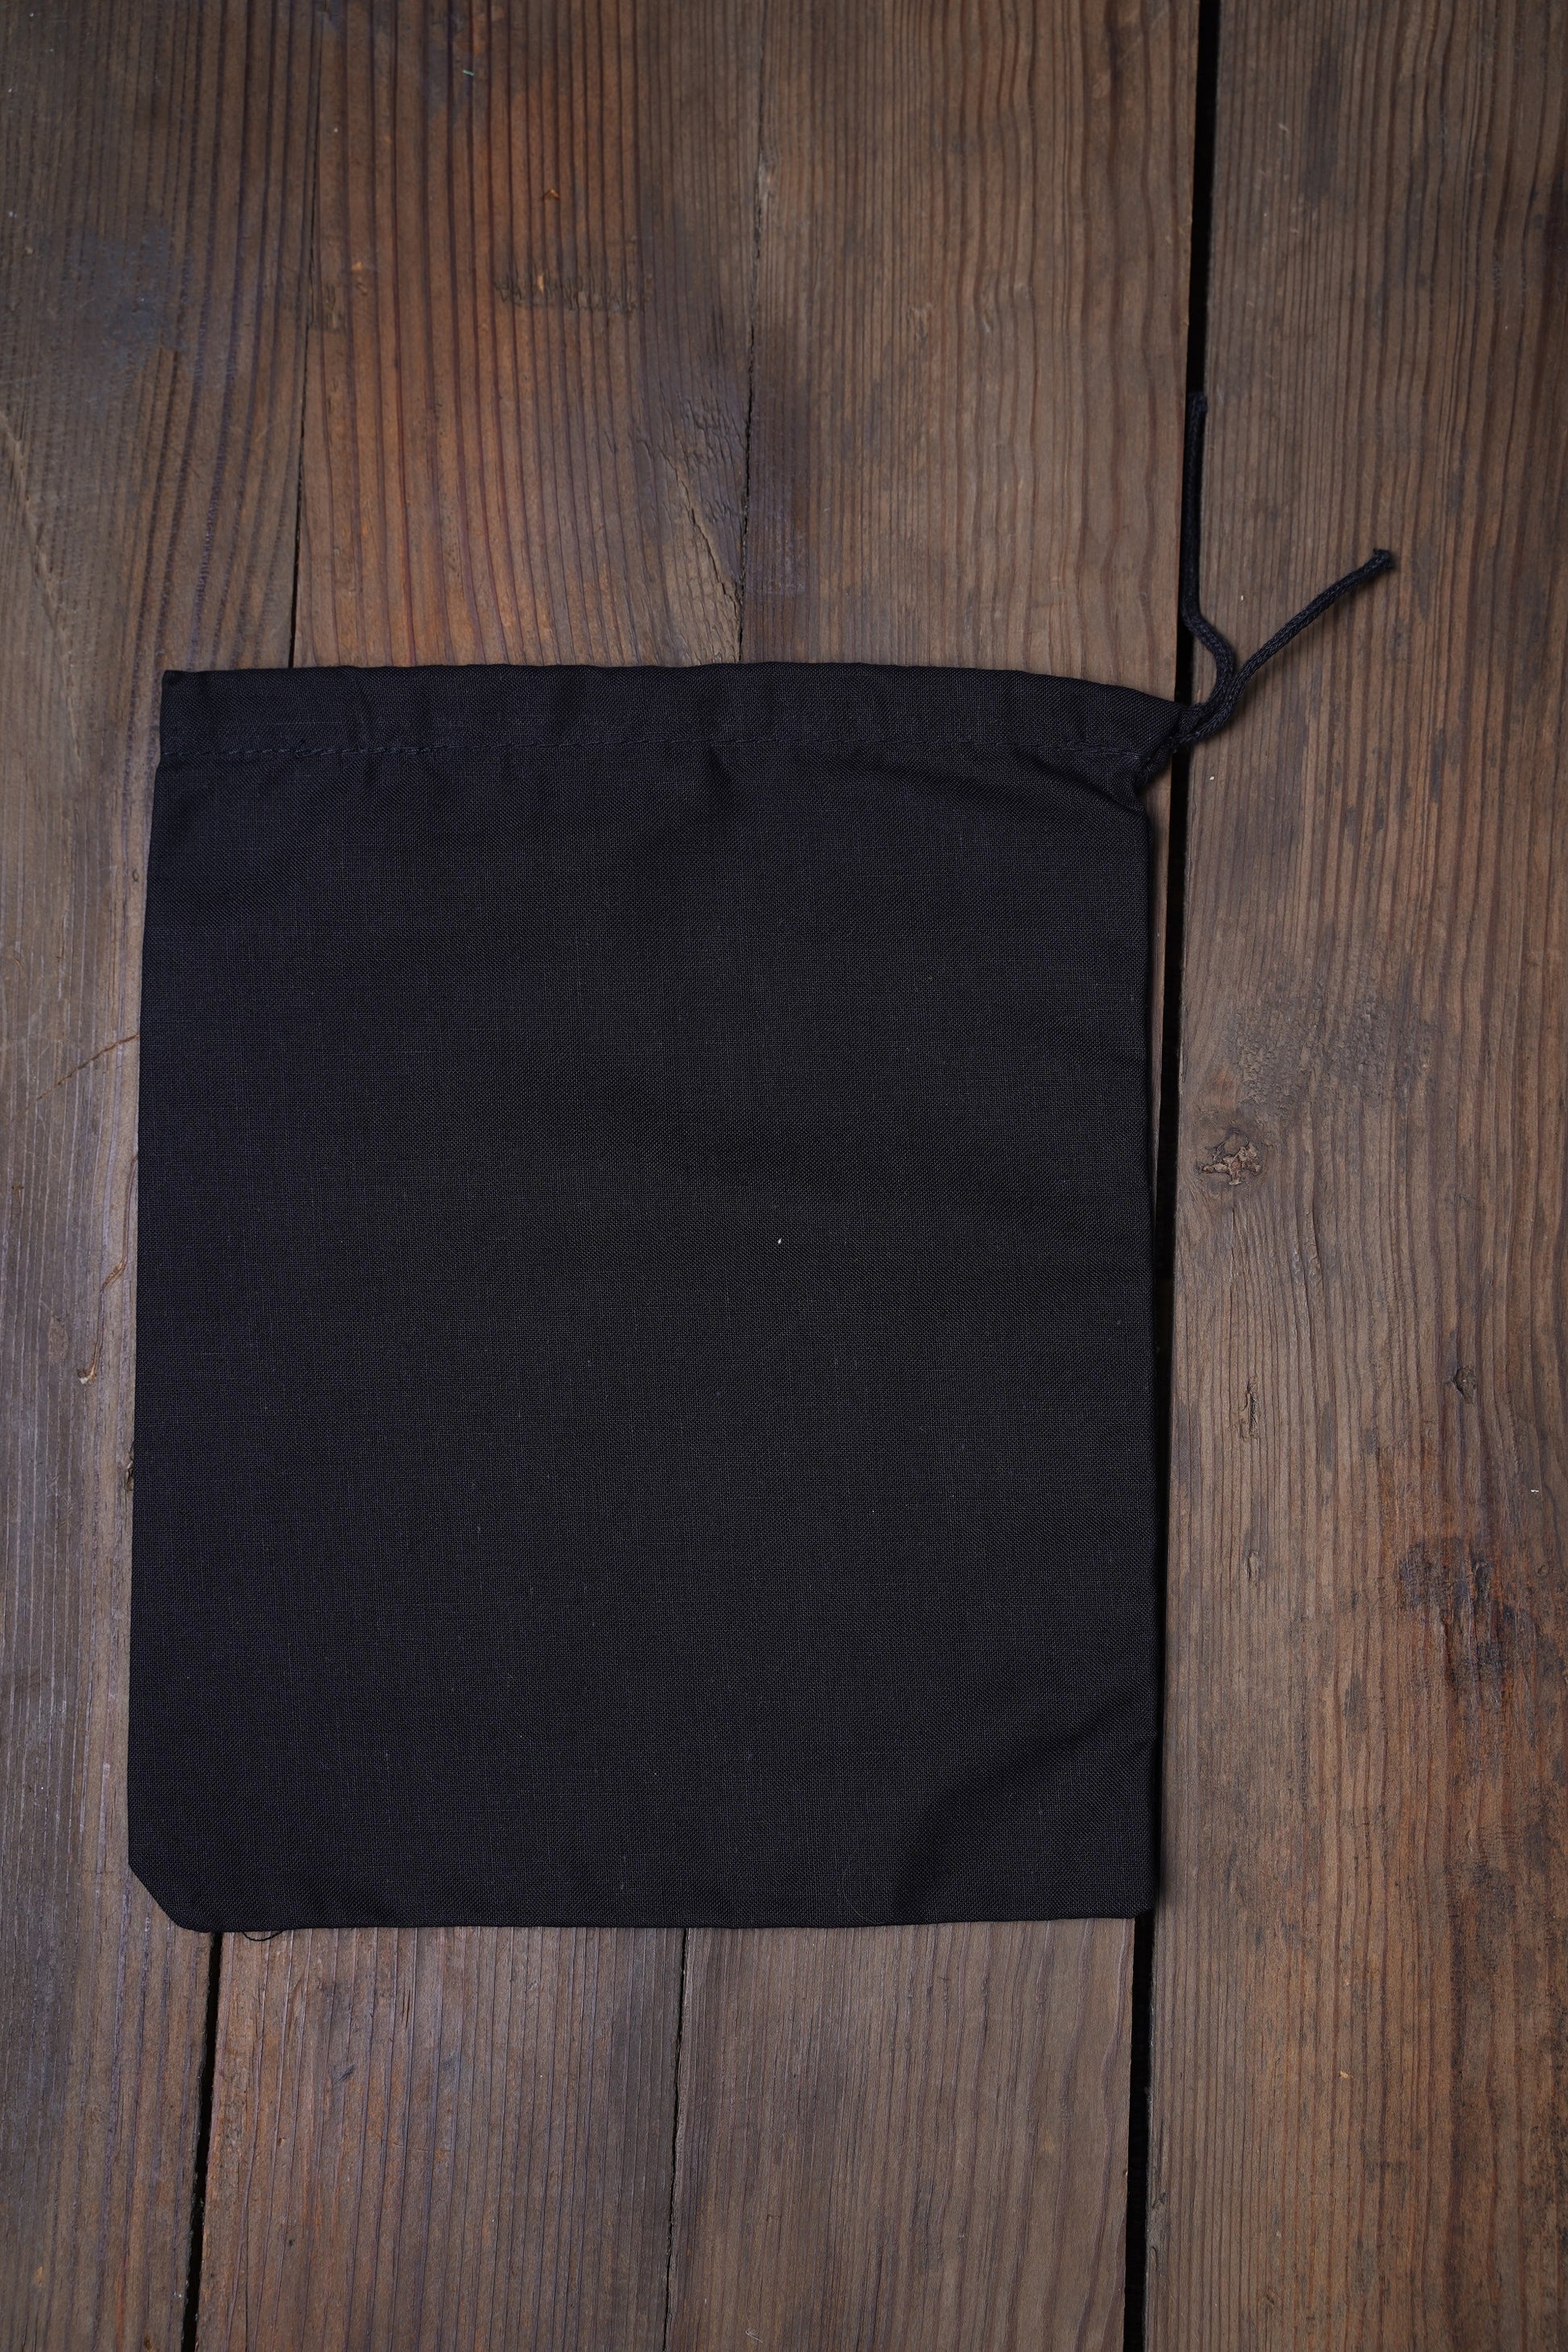 Reusable drawstring bags black color 8x12 inches